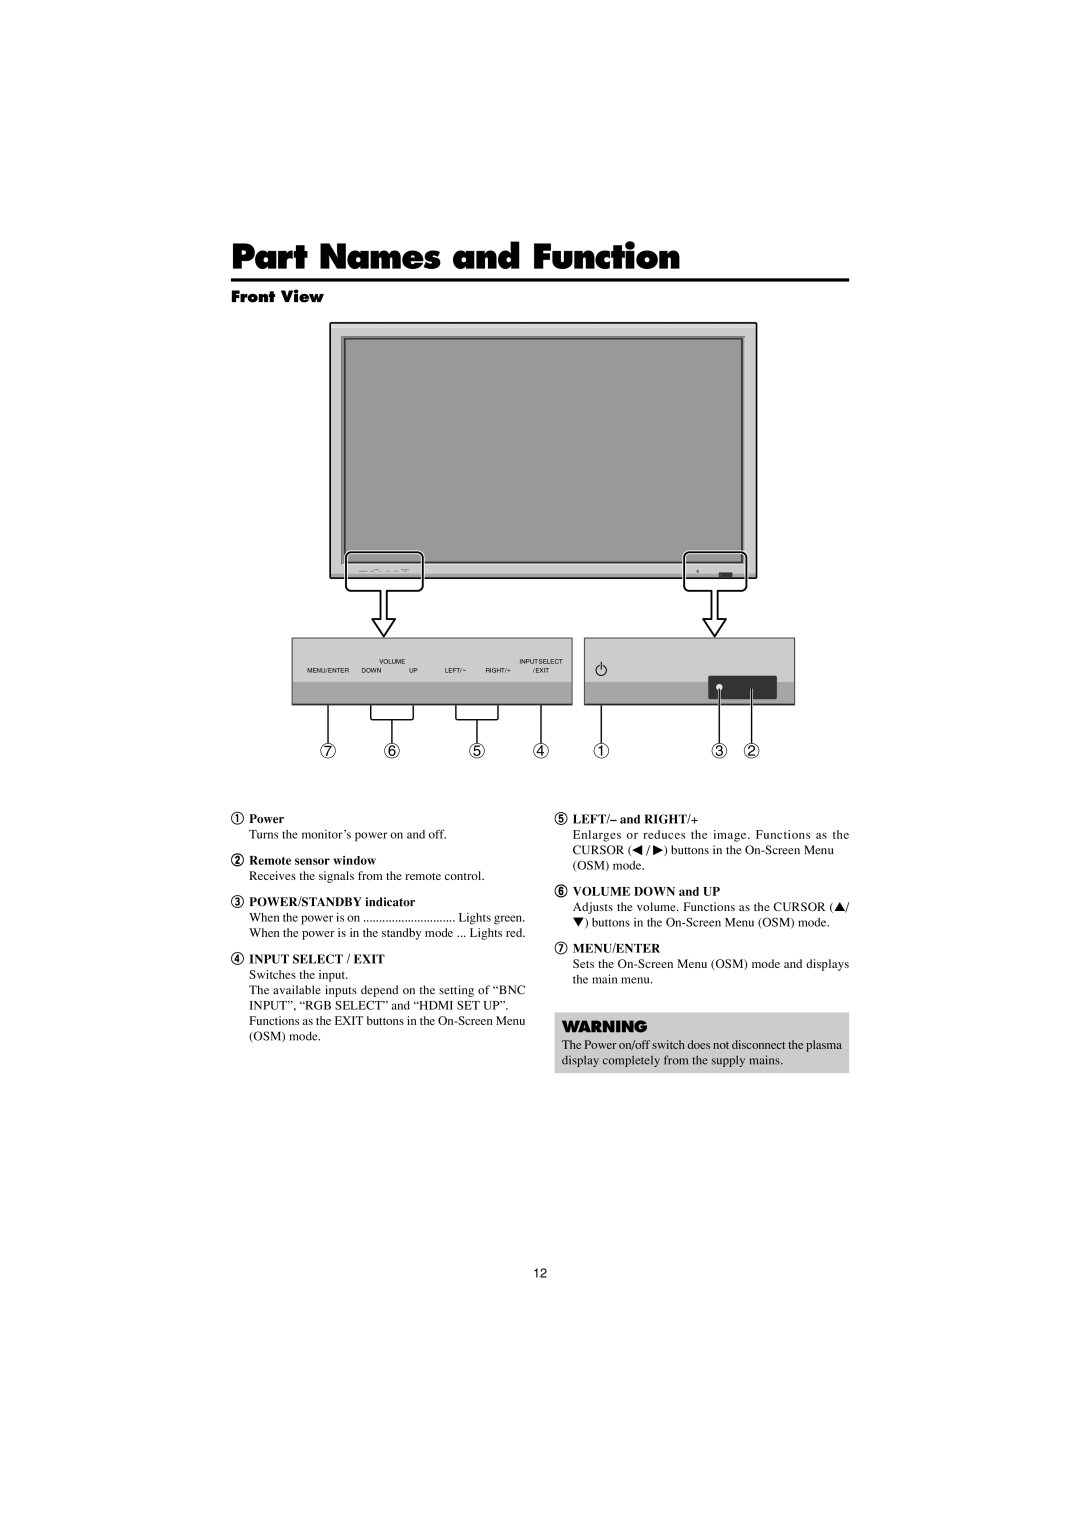 Marantz PD4230V manual Part Names and Function, Front View, Turns the monitor’s power on and off 